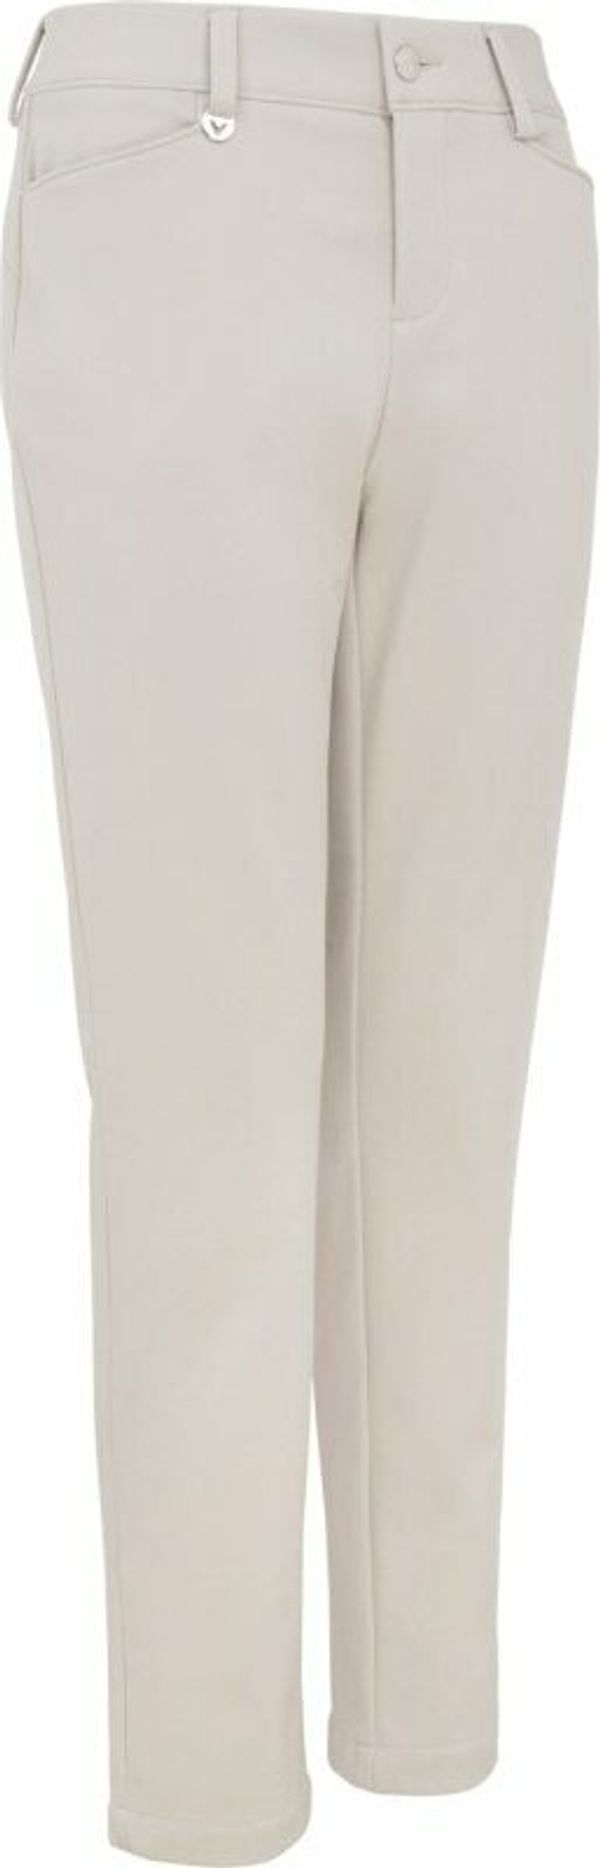 Callaway Callaway Thermal Womens Trousers Chateau Gray 2/29